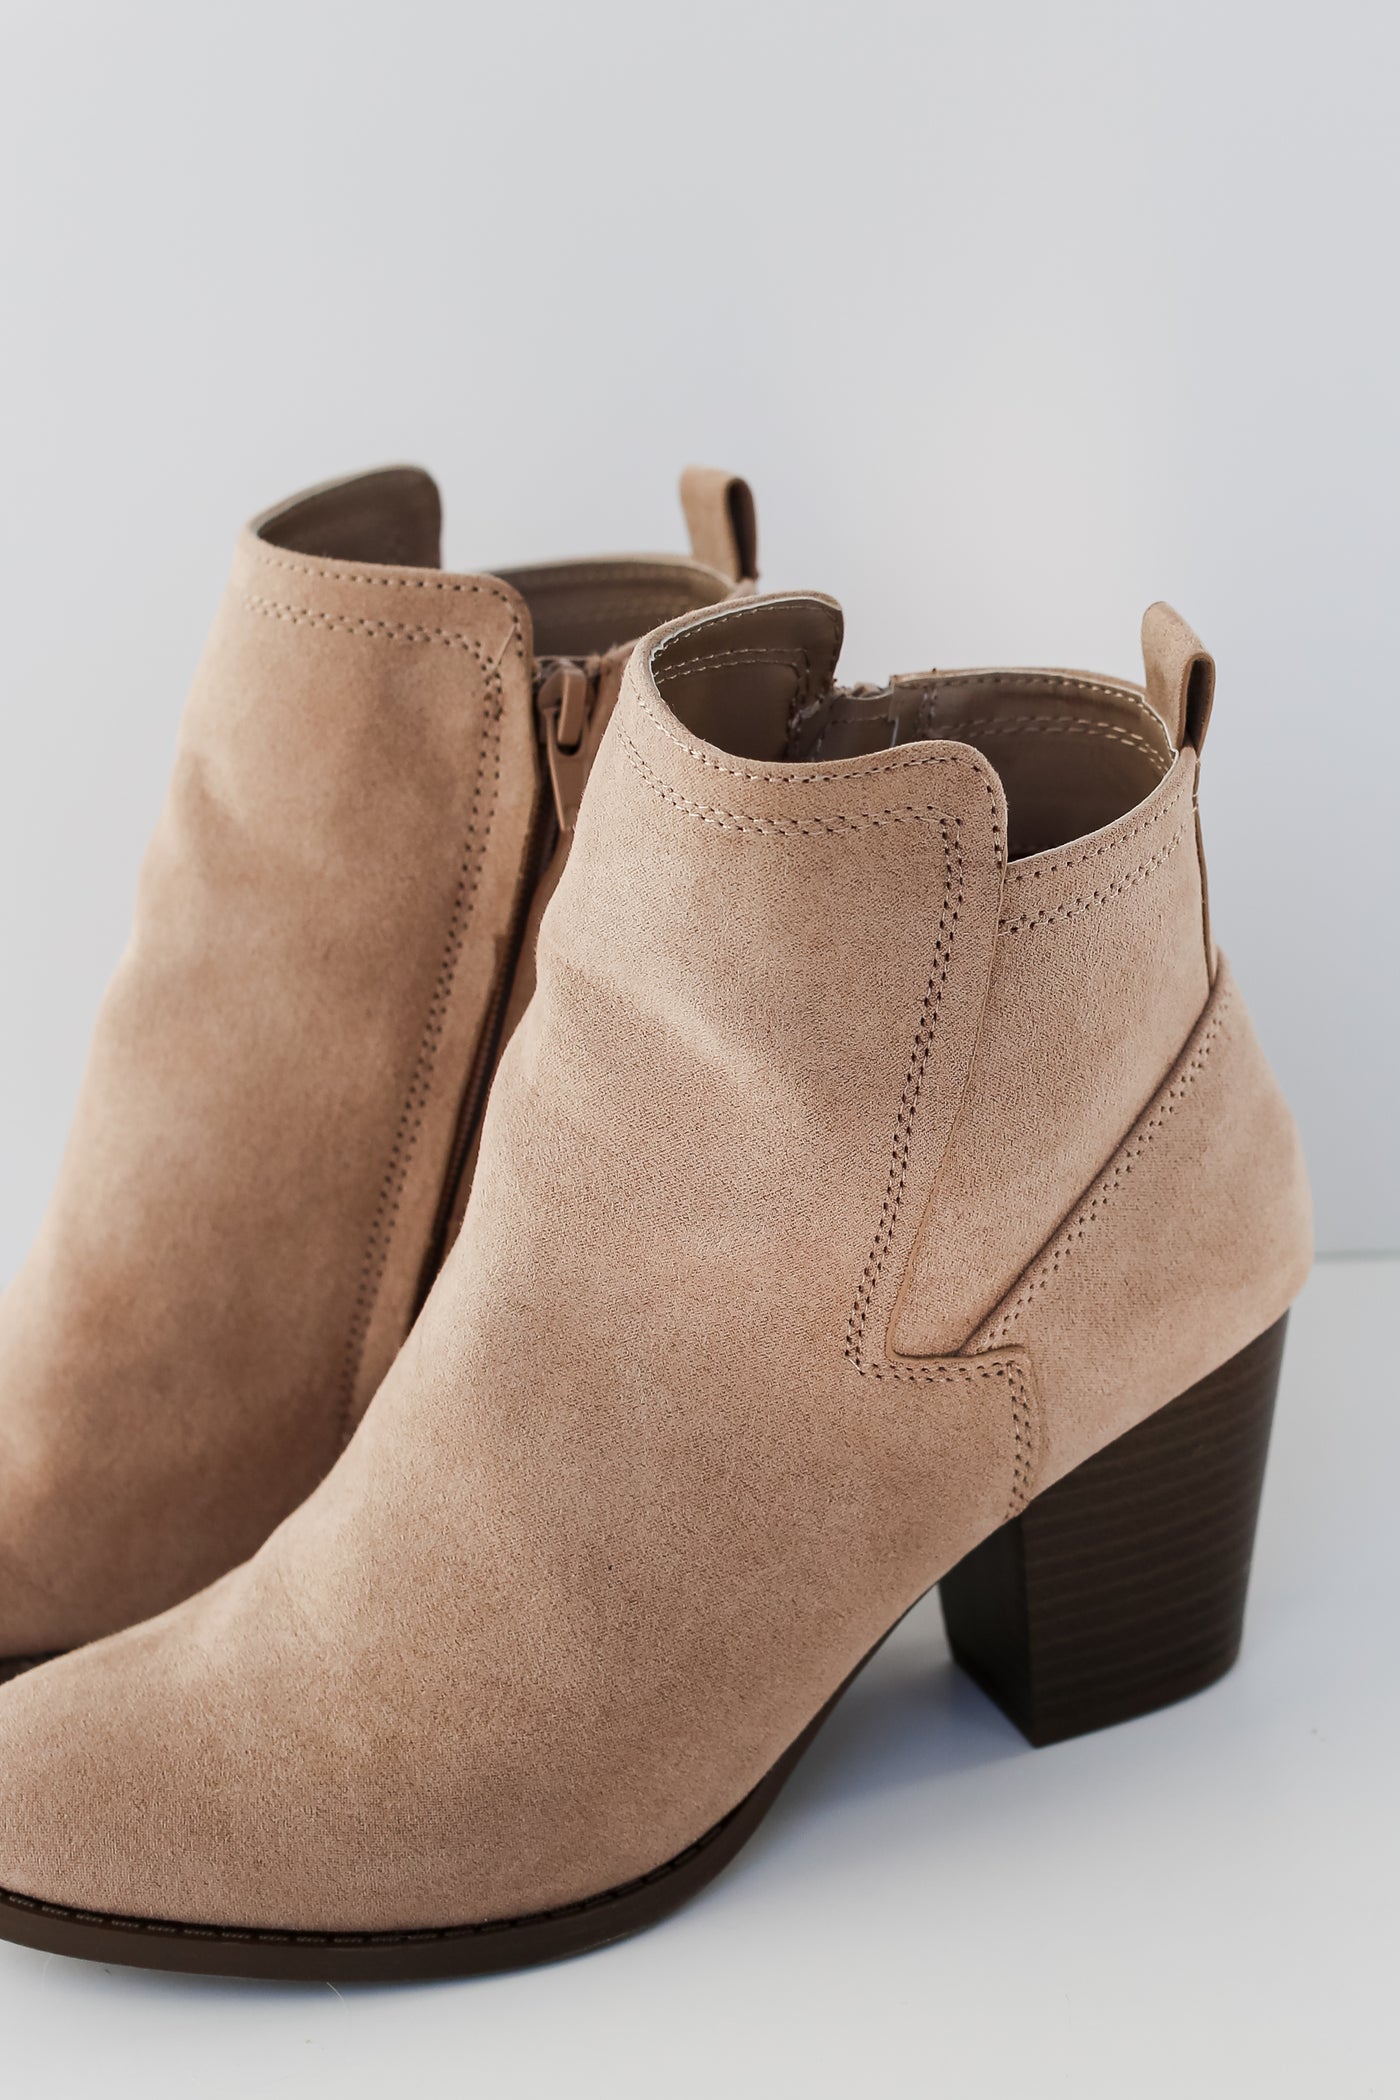 cute Taupe Booties close up